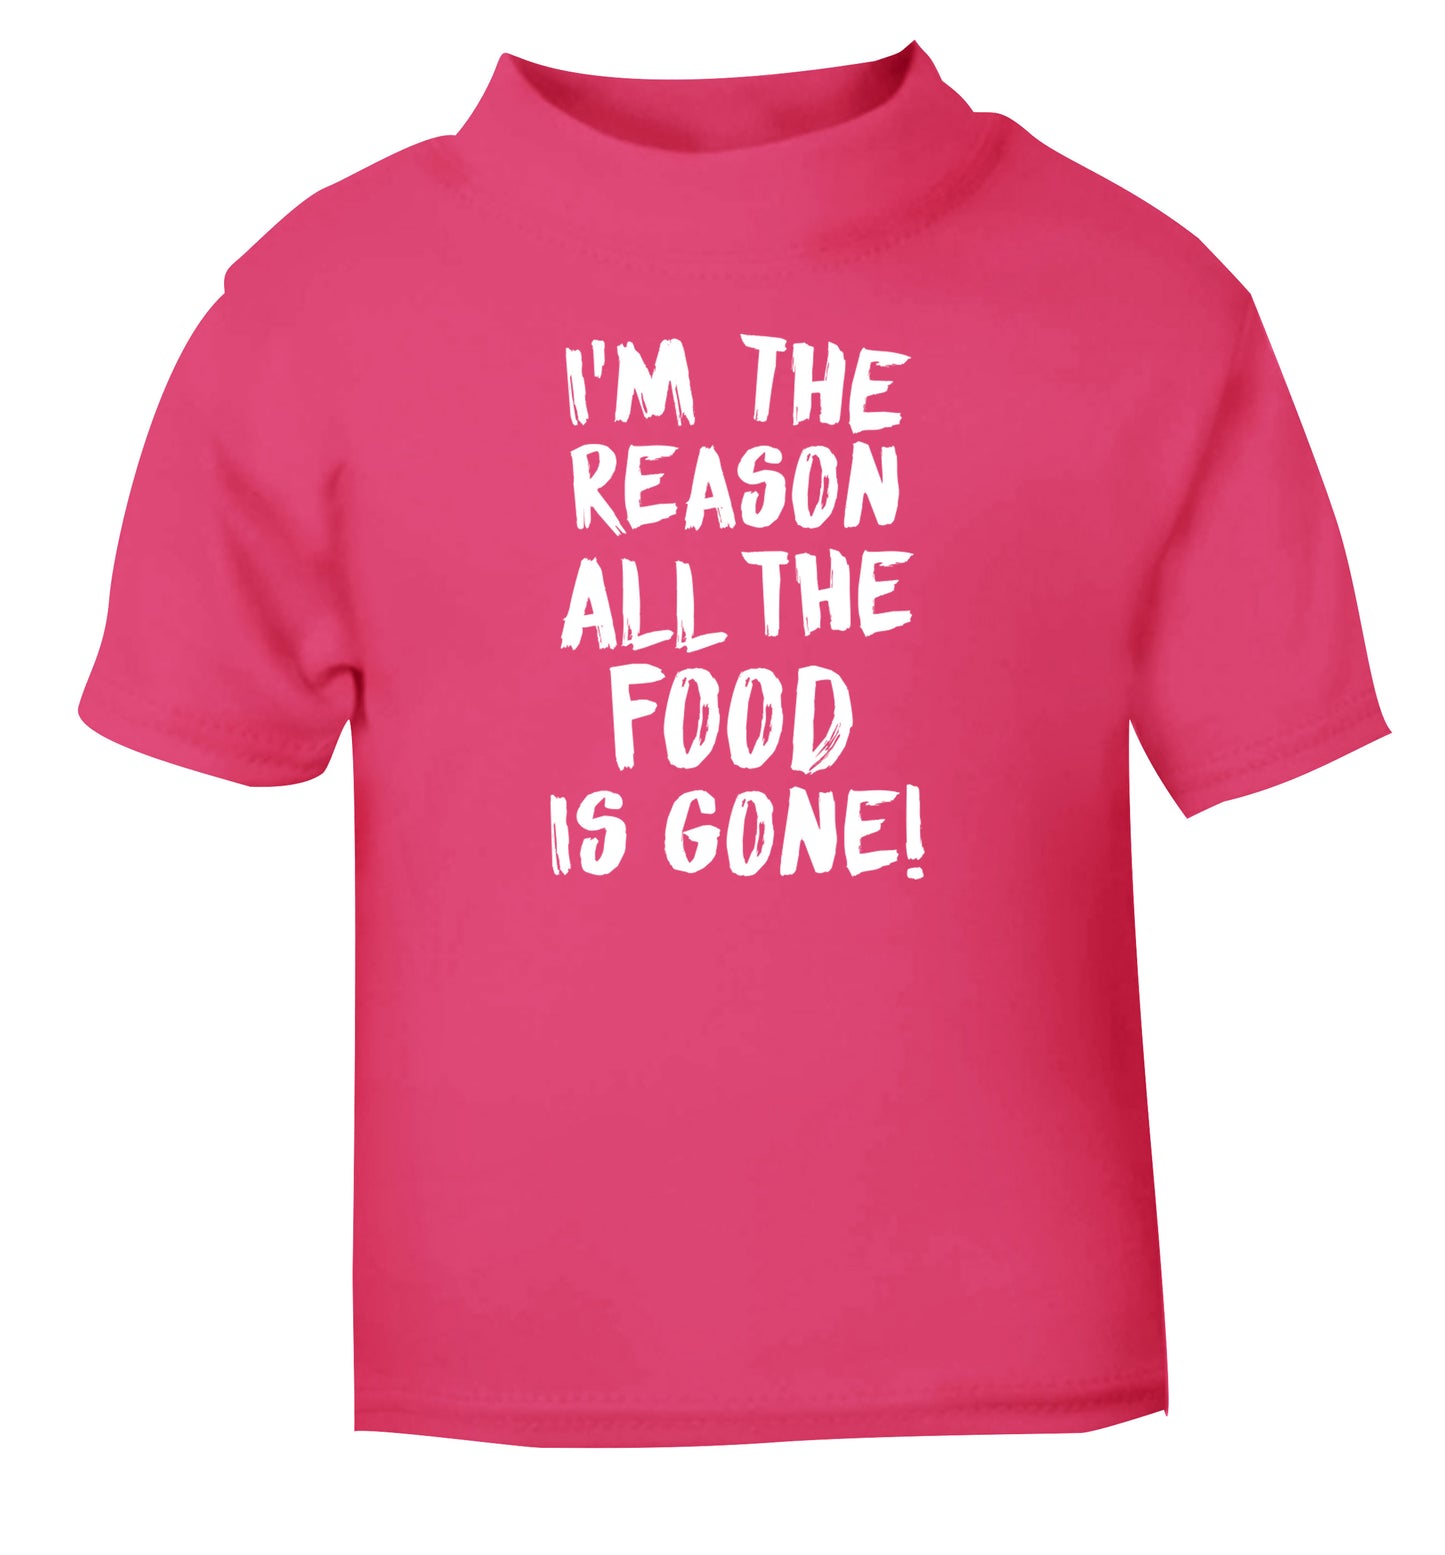 I'm the reason why all the food is gone pink Baby Toddler Tshirt 2 Years